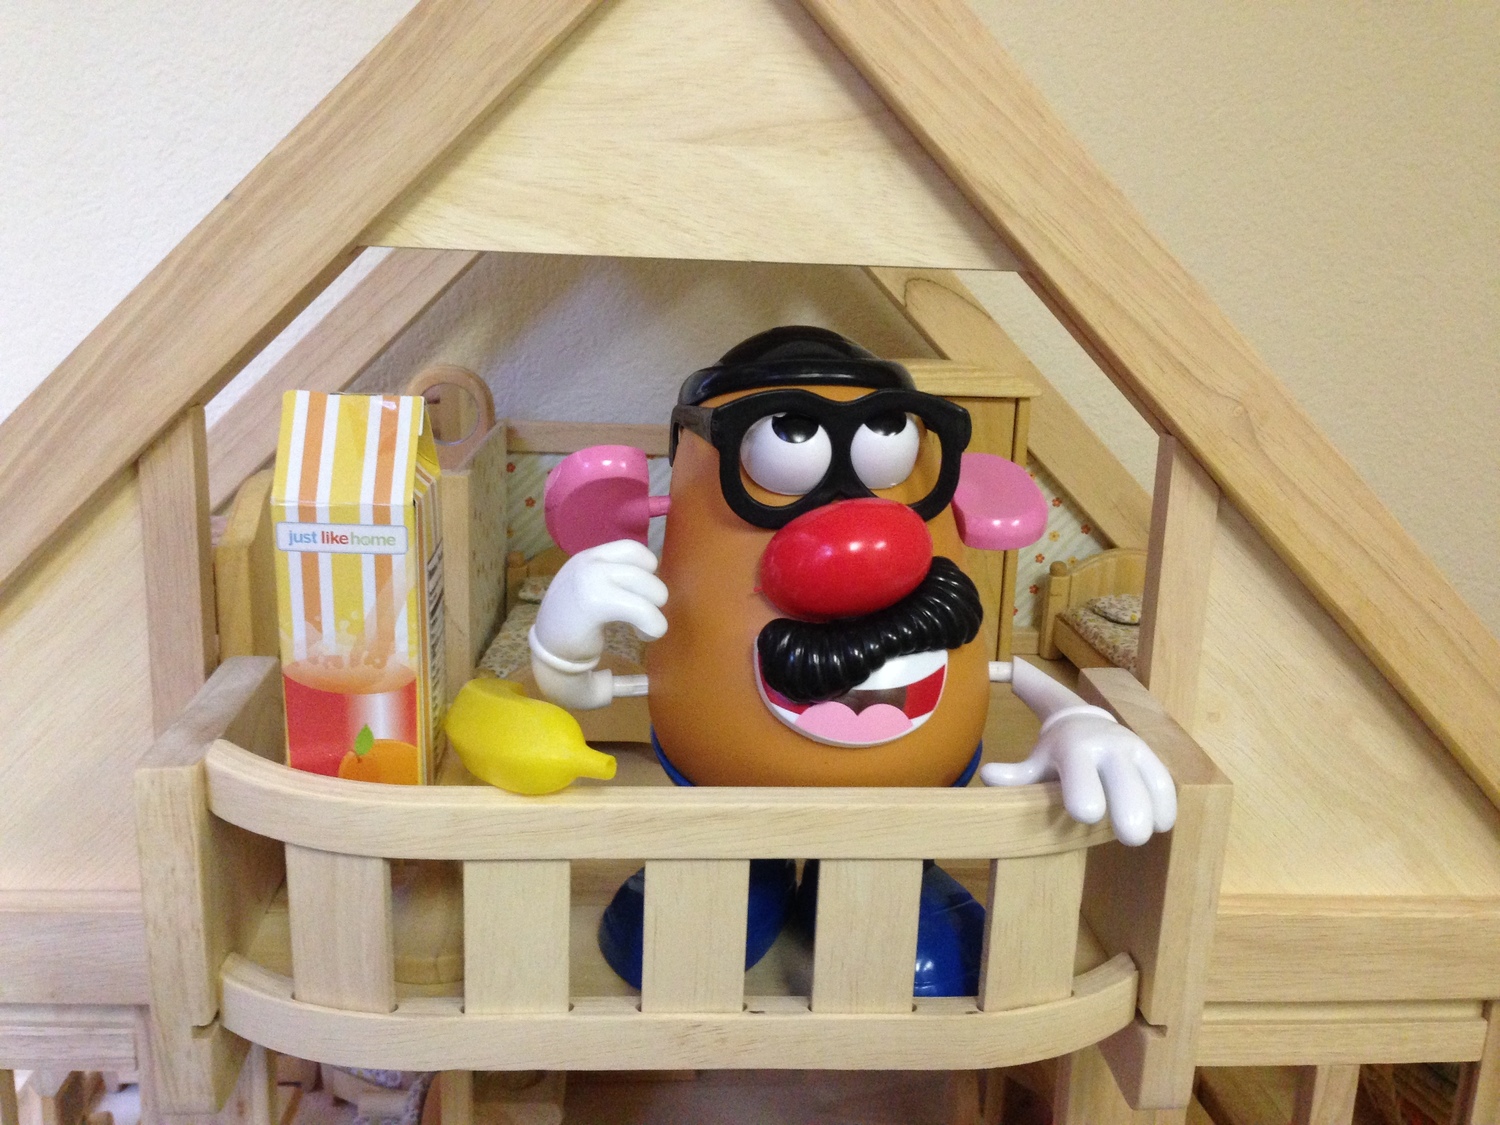 Gallery Photo of Mr Potato Head giving an audience